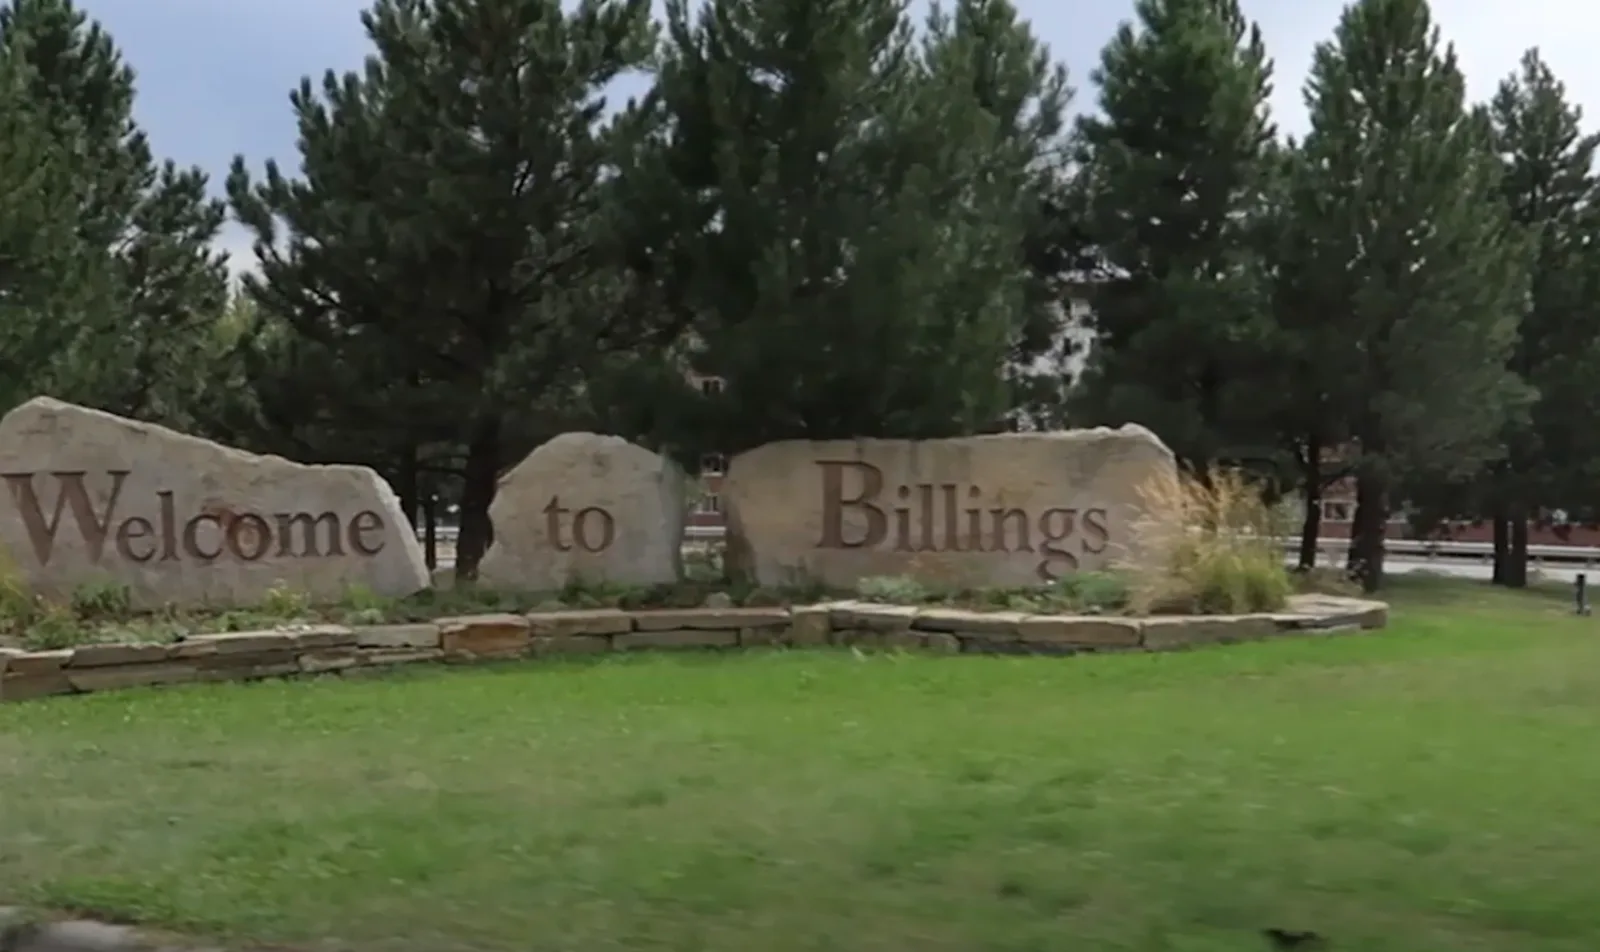 Welcome to Billings Sign on Rocks